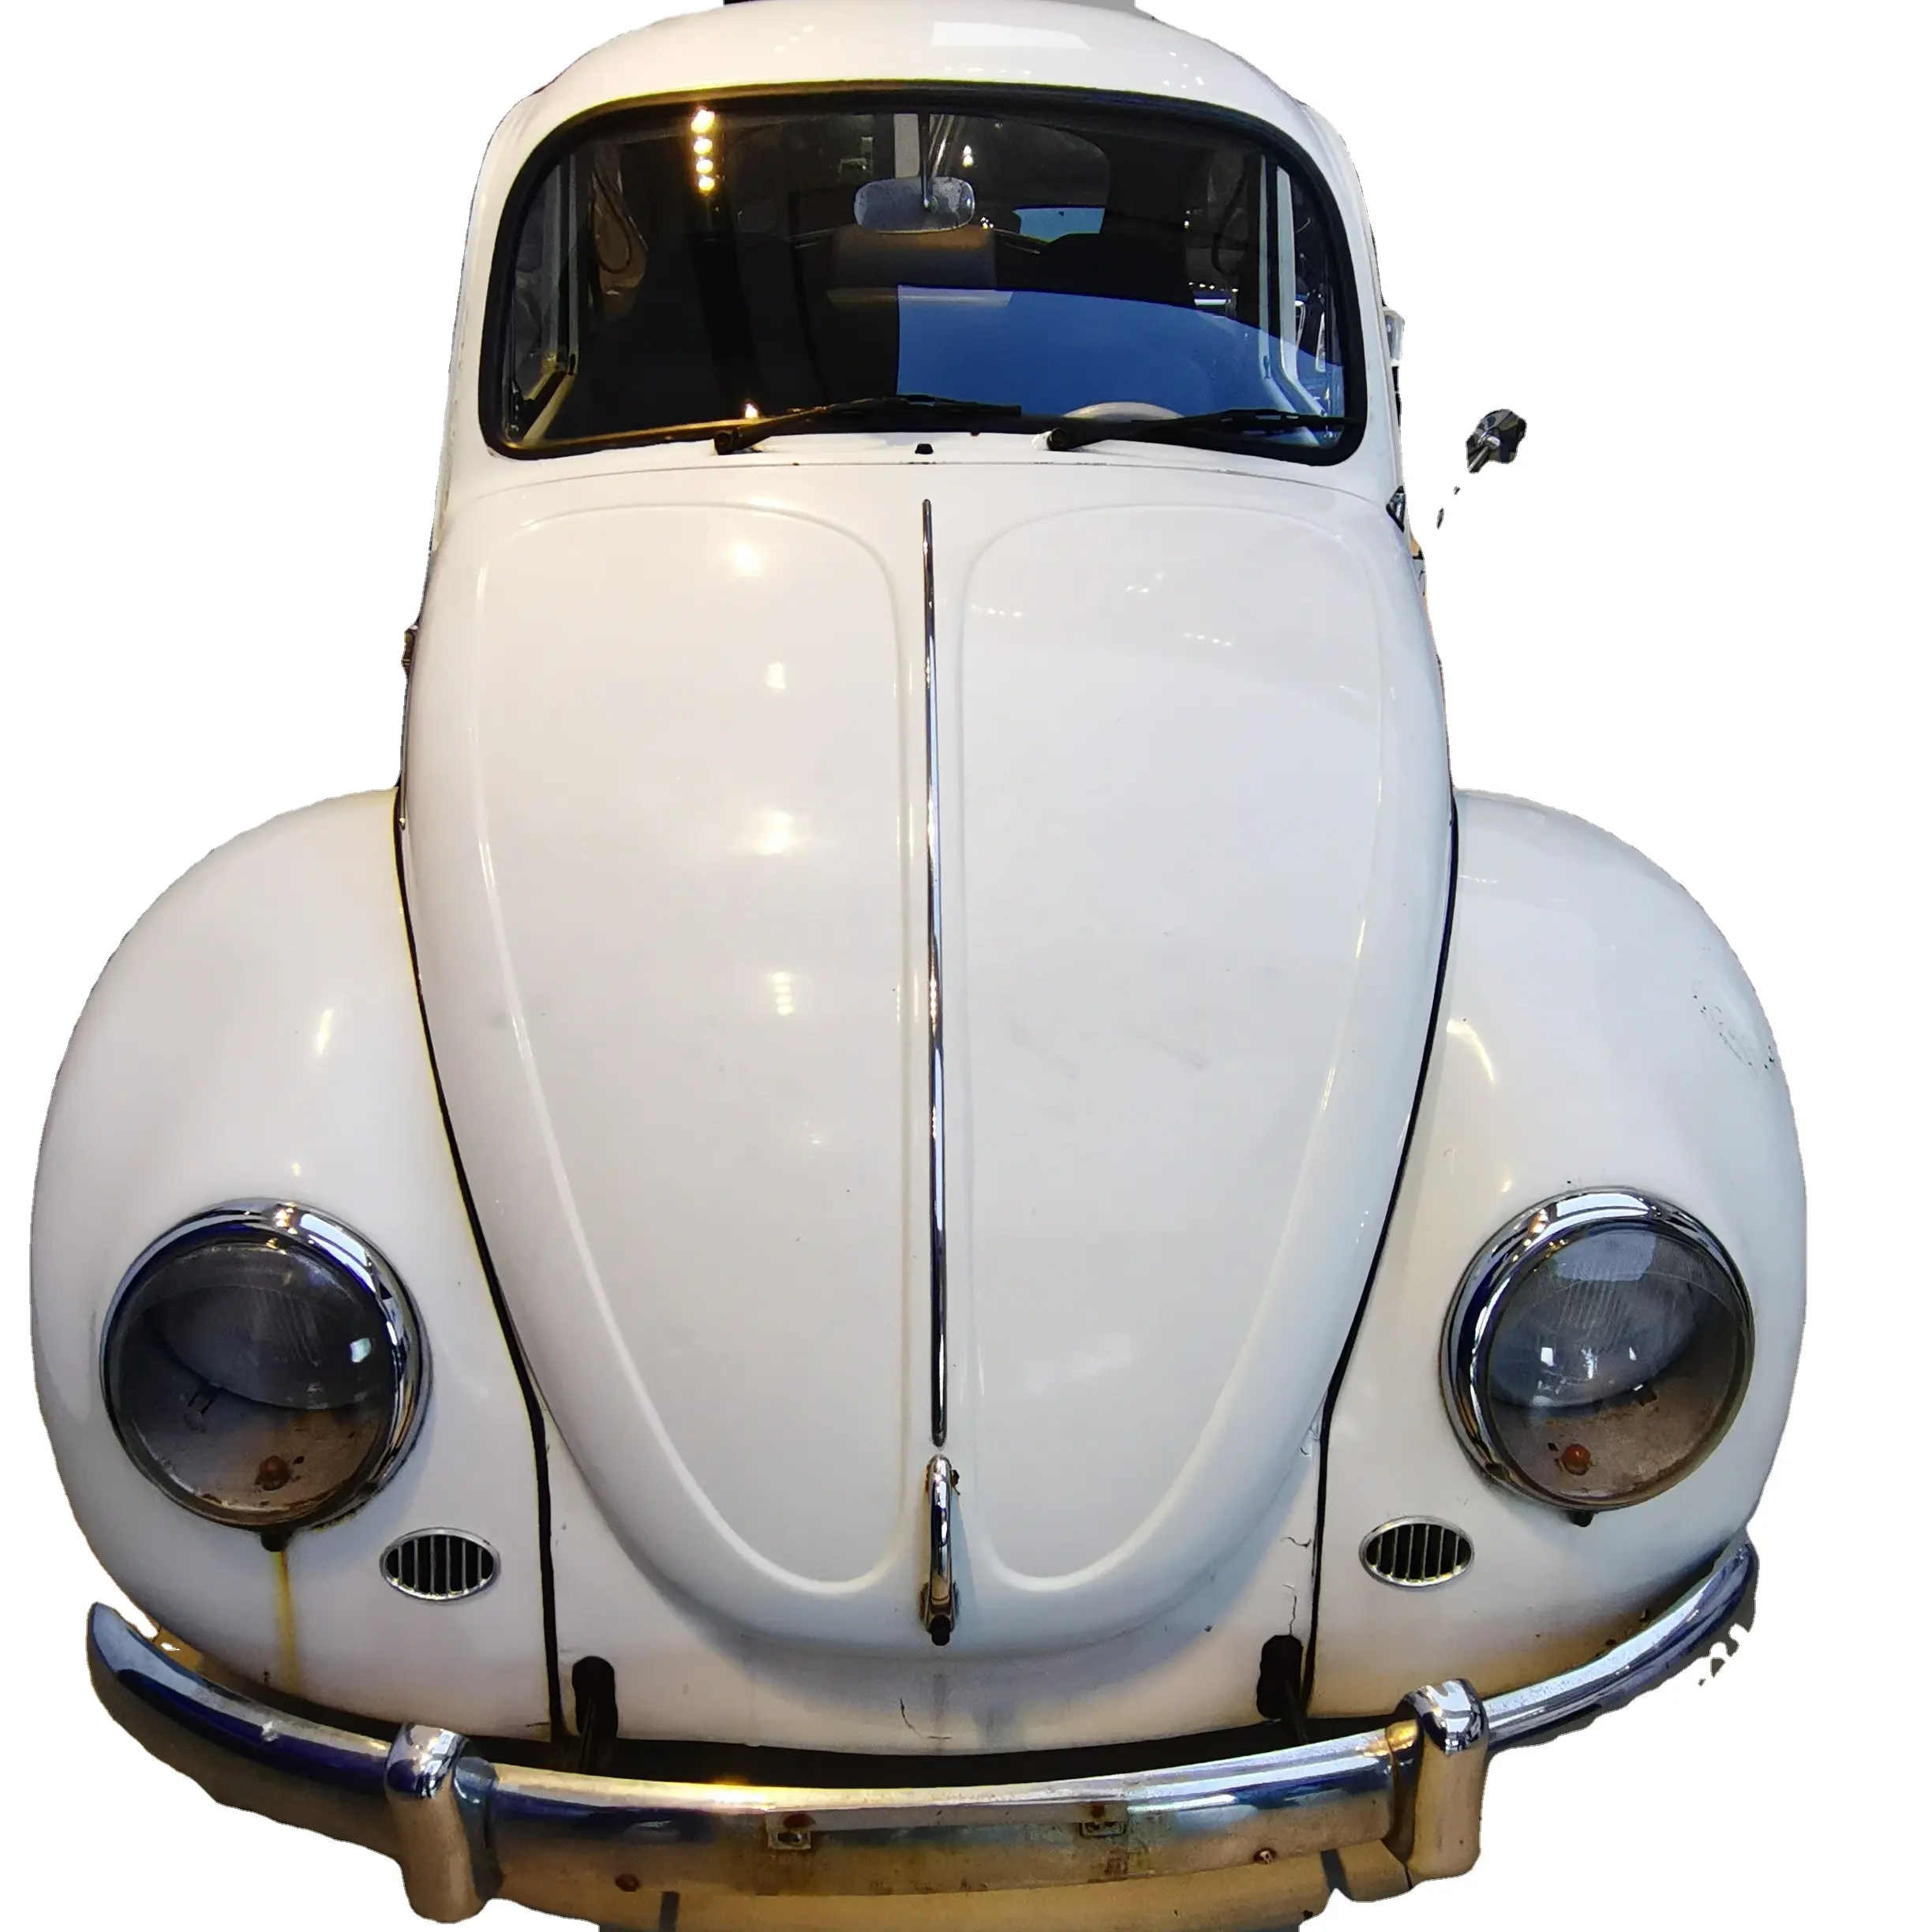 conversion from gasoline to electric Bug Beetle Super Bug Beetle Type 3 popular UK Italy Germany France Belgium Sweden etc